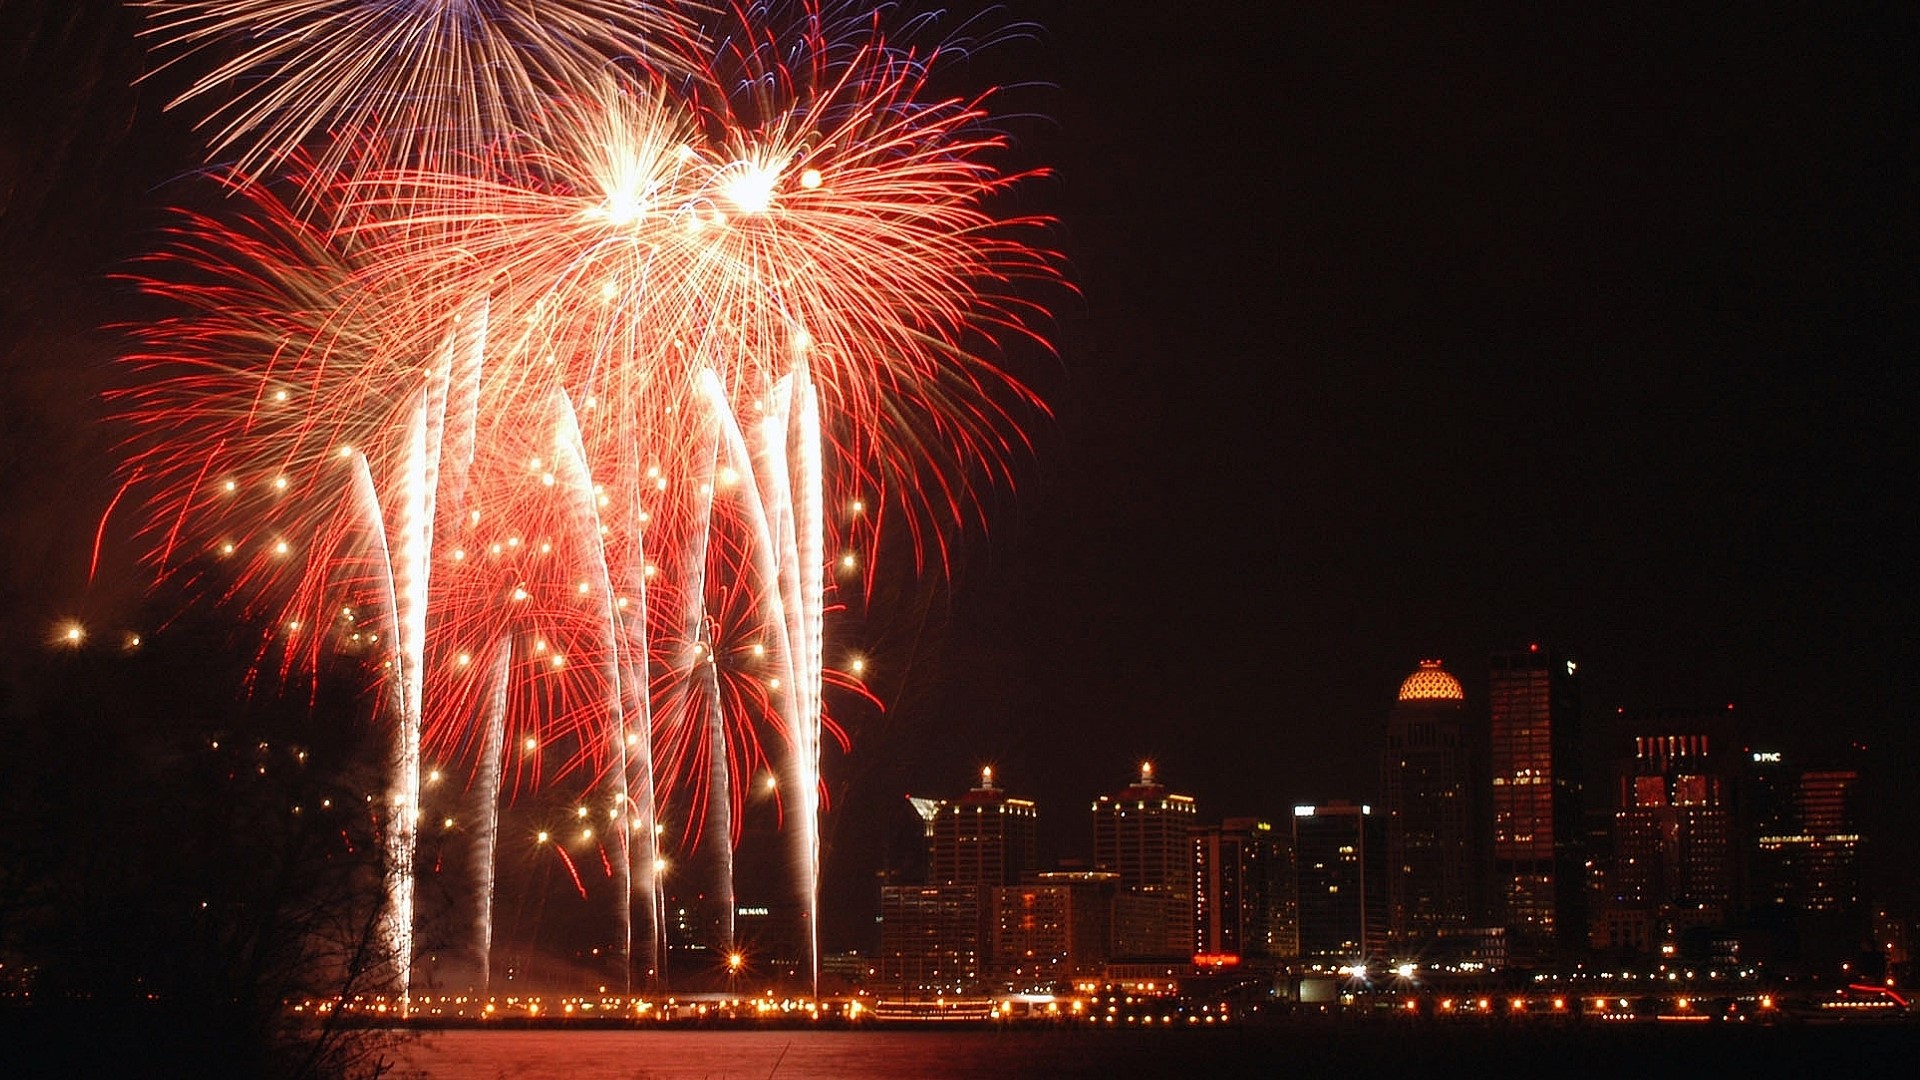 The nation's biggest fireworks celebration is nearly here to kick off Kentucky Derby 150 celebrations.